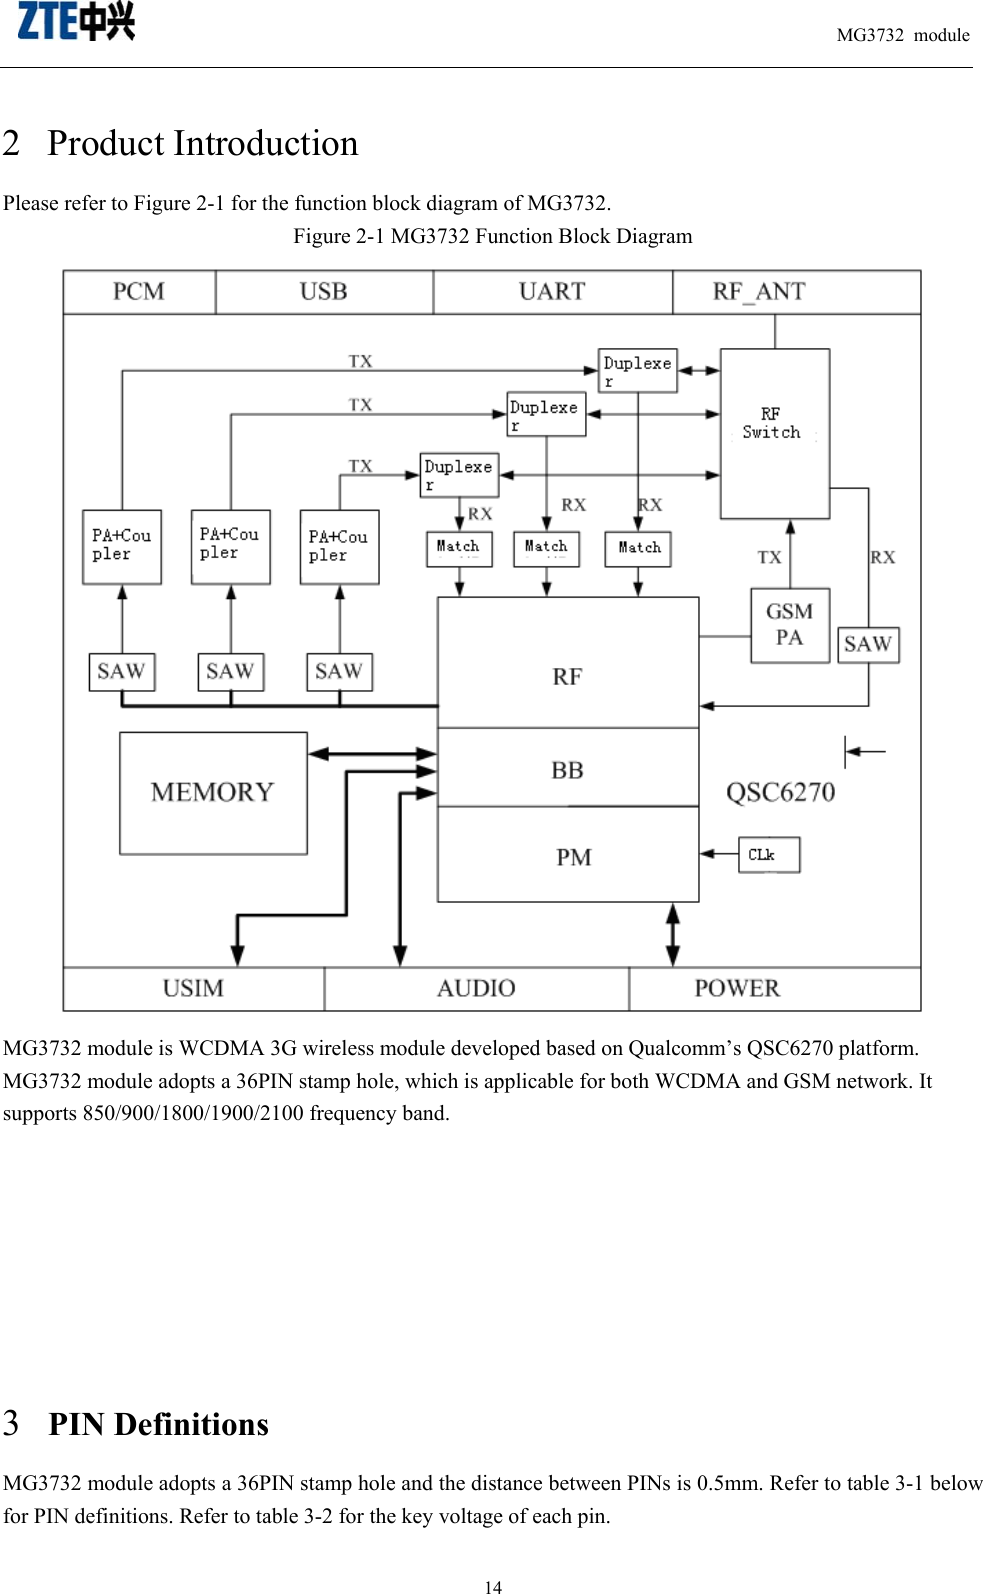                                                                          MG3732 module                                                    14 2 Product Introduction   Please refer to Figure 2-1 for the function block diagram of MG3732. Figure 2-1 MG3732 Function Block Diagram      MG3732 module is WCDMA 3G wireless module developed based on Qualcomm’s QSC6270 platform. MG3732 module adopts a 36PIN stamp hole, which is applicable for both WCDMA and GSM network. It supports 850/900/1800/1900/2100 frequency band.           3 PIN Definitions MG3732 module adopts a 36PIN stamp hole and the distance between PINs is 0.5mm. Refer to table 3-1 below for PIN definitions. Refer to table 3-2 for the key voltage of each pin. 